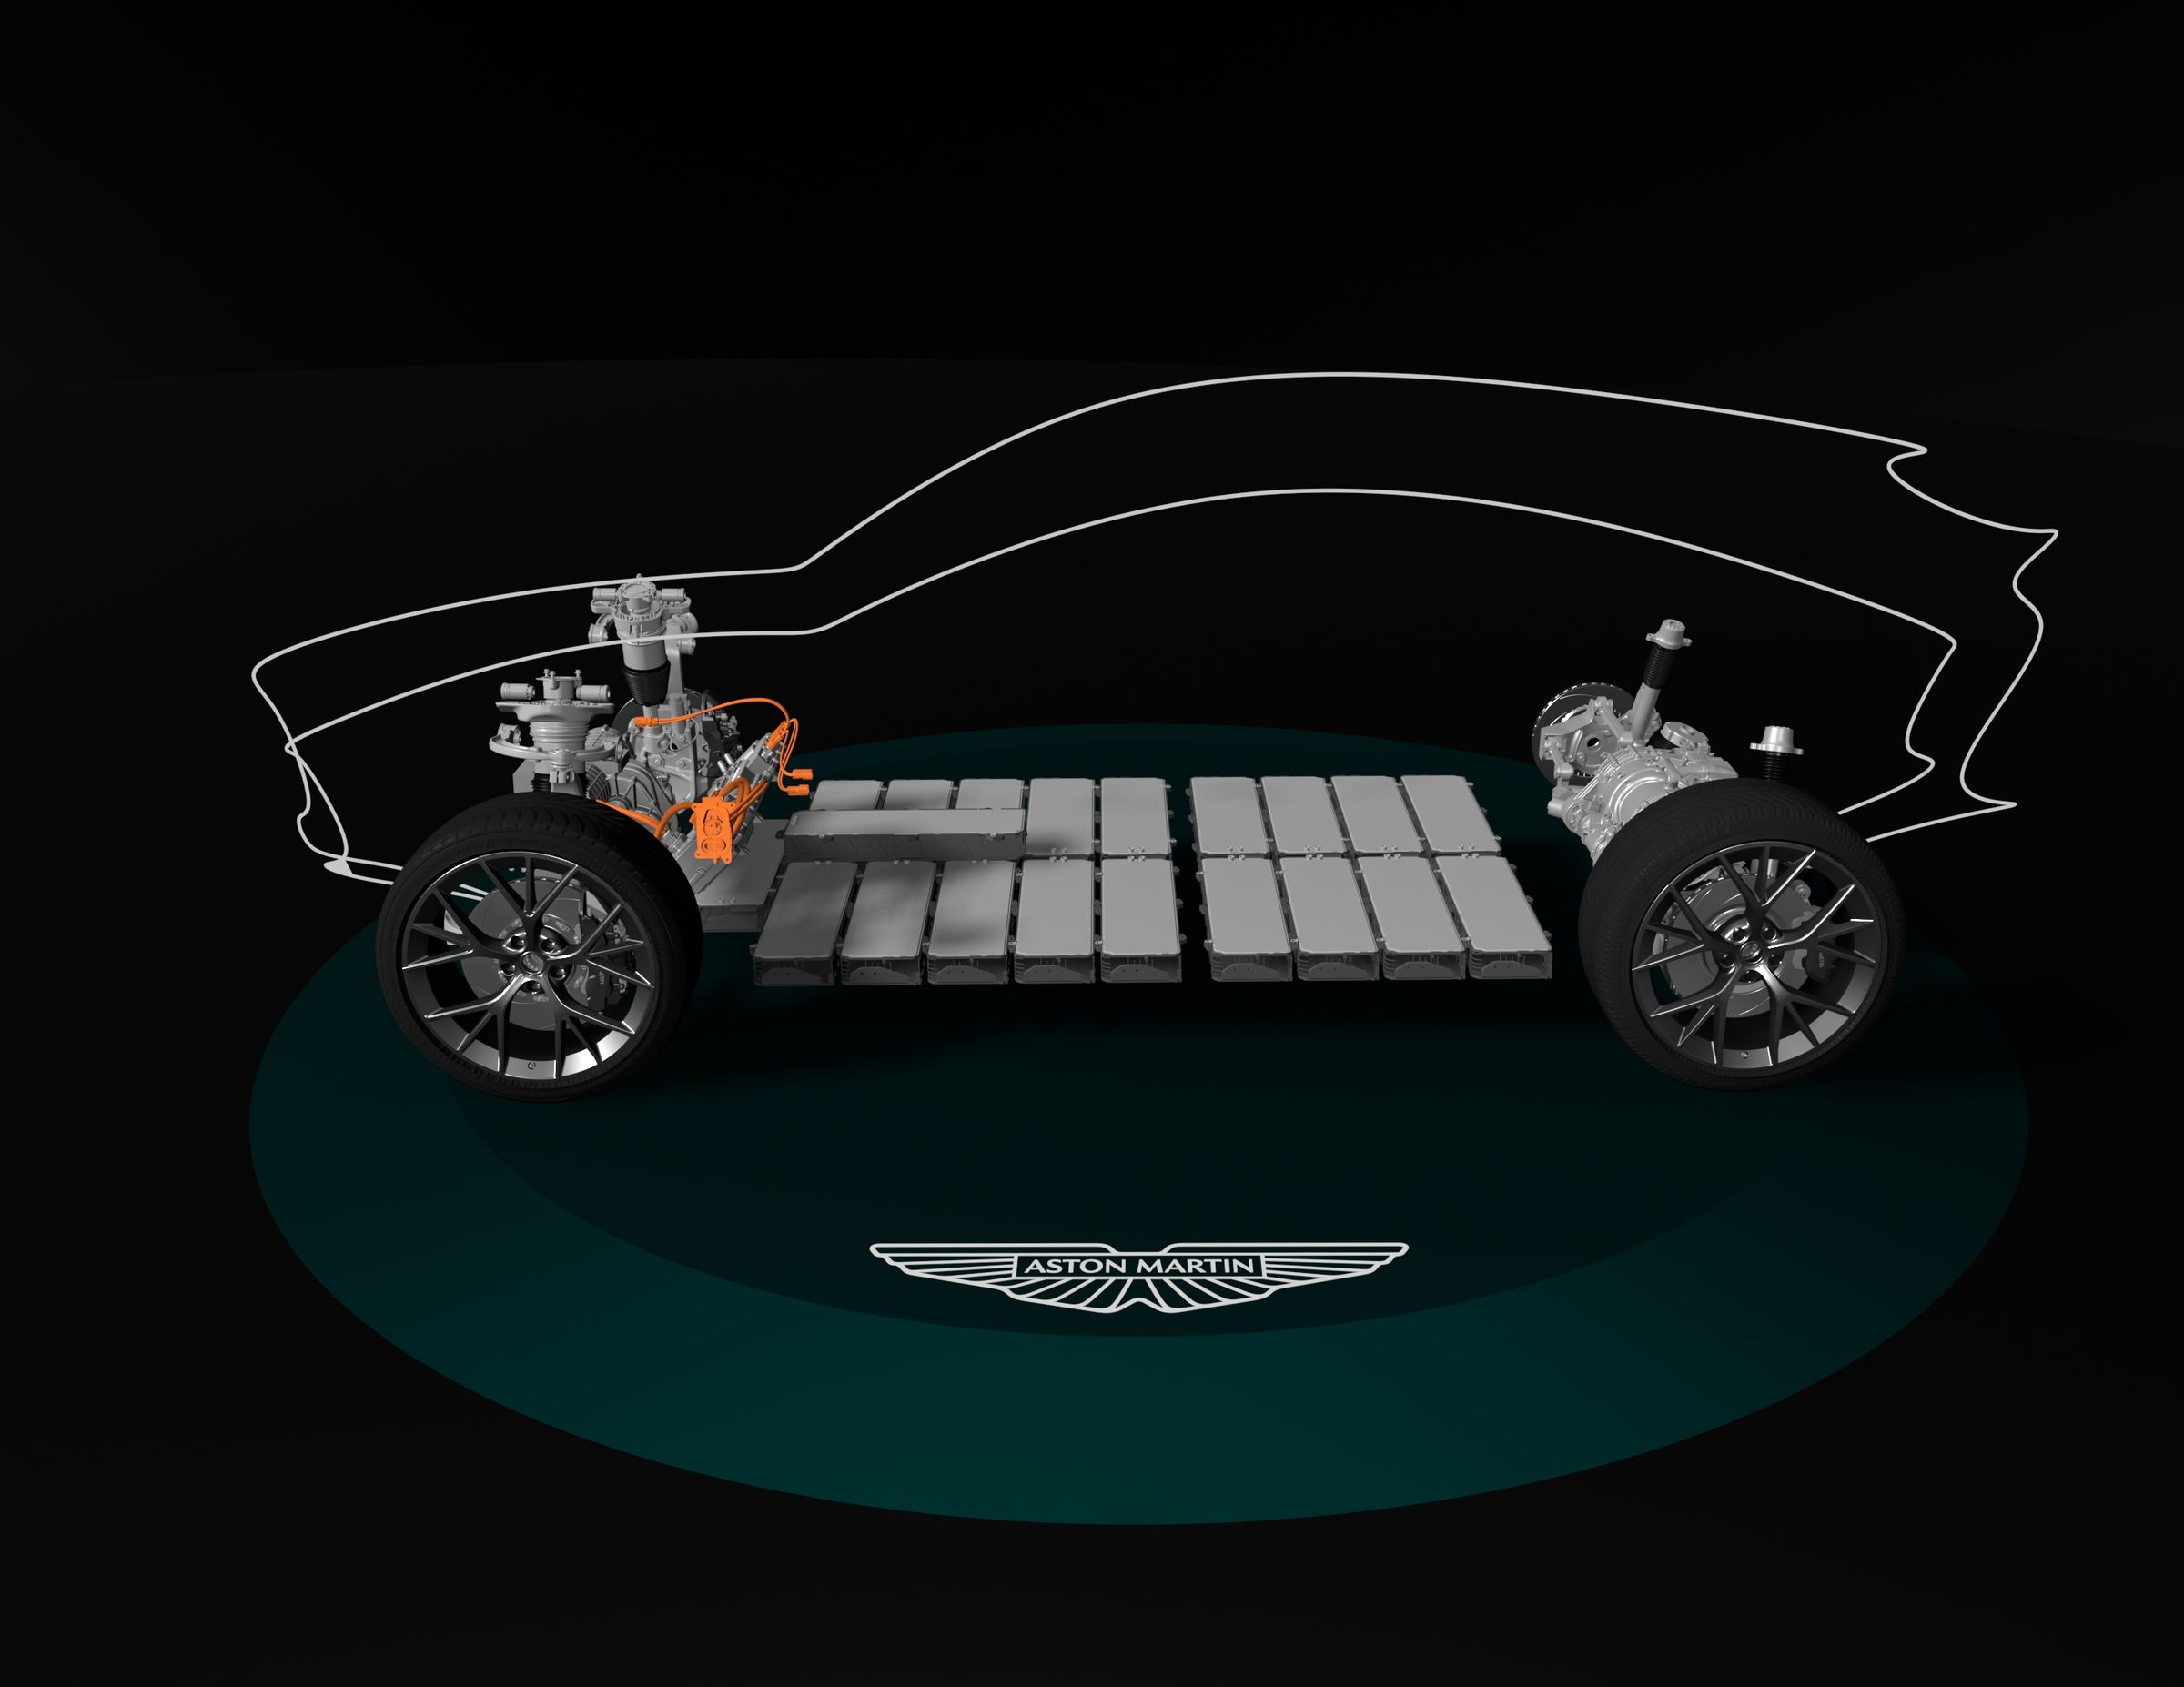 An outline of two car bodies over a drwing of an electric car platform with wheels and battery cells, demonstrating what Aston MArtin is building.